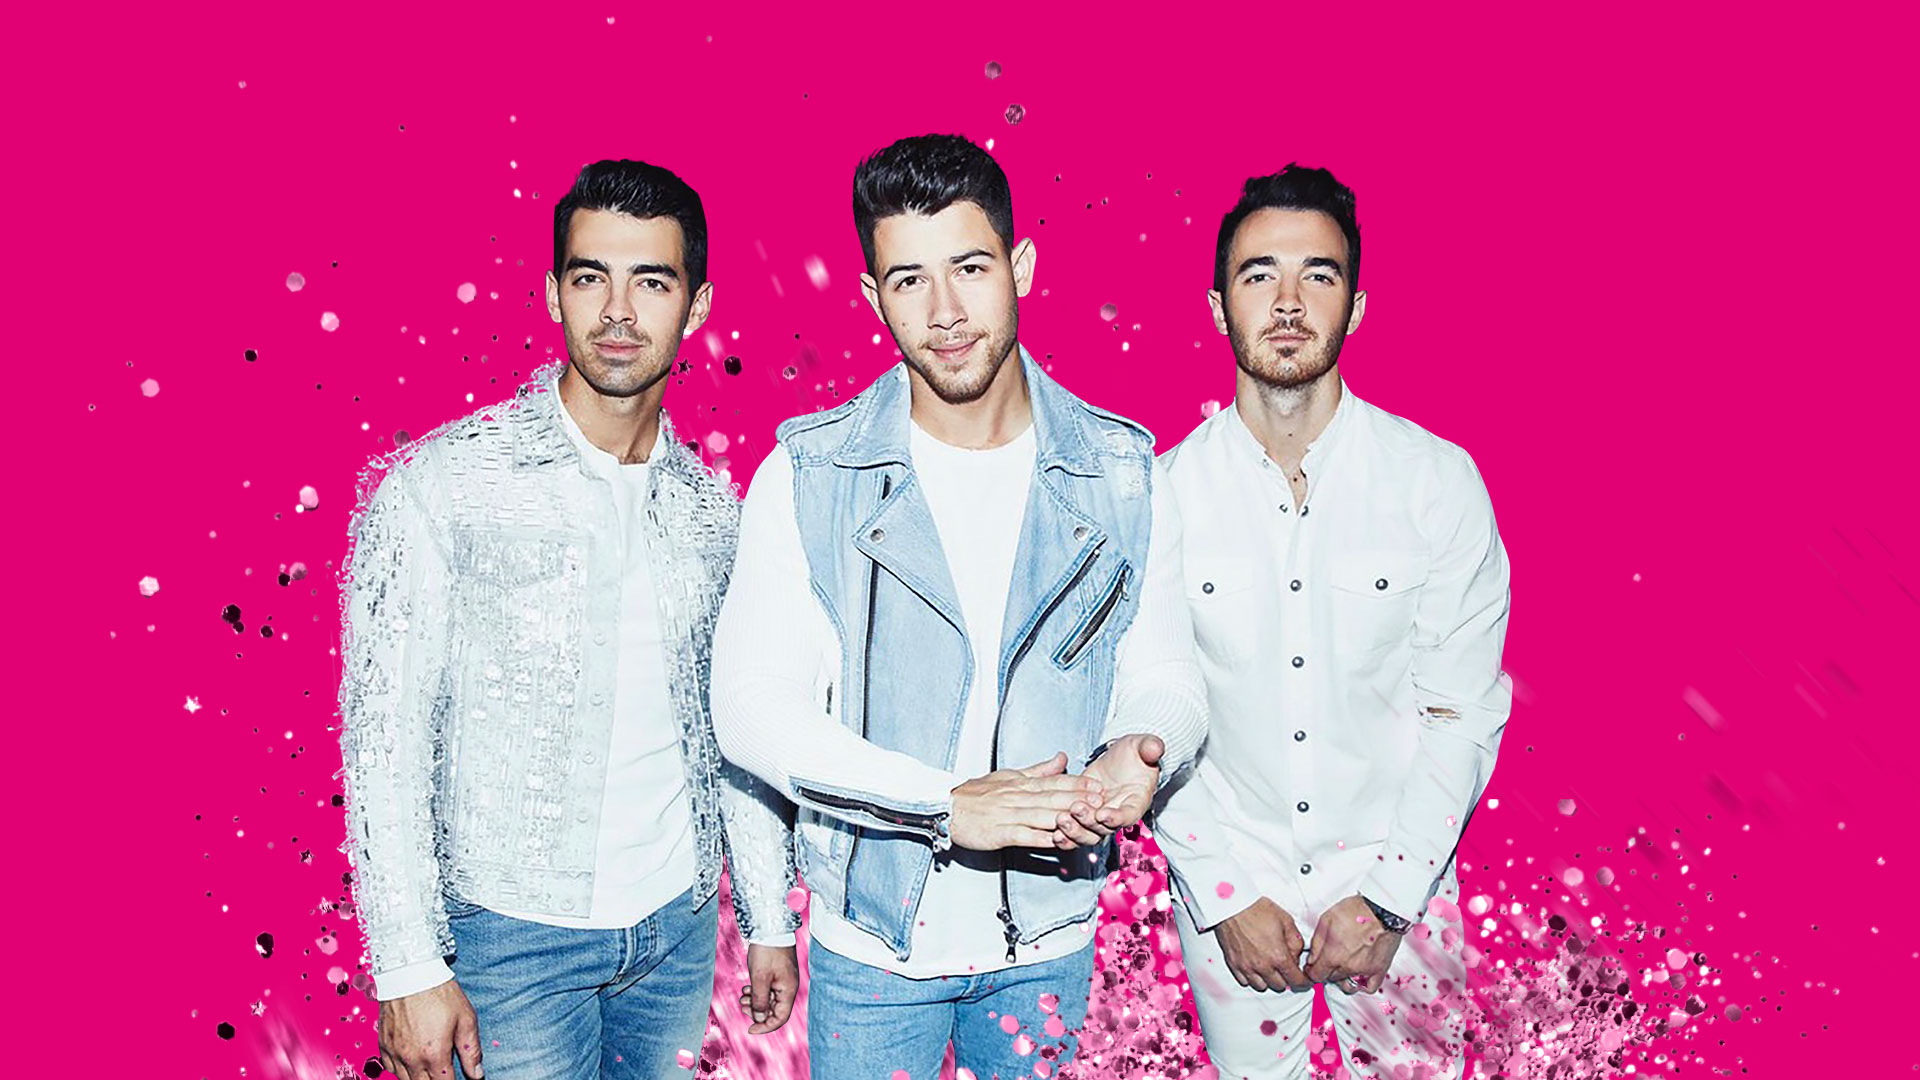 Jonas Brothers Confirmed to Perform at the 2019 AMAs. American Music Awards